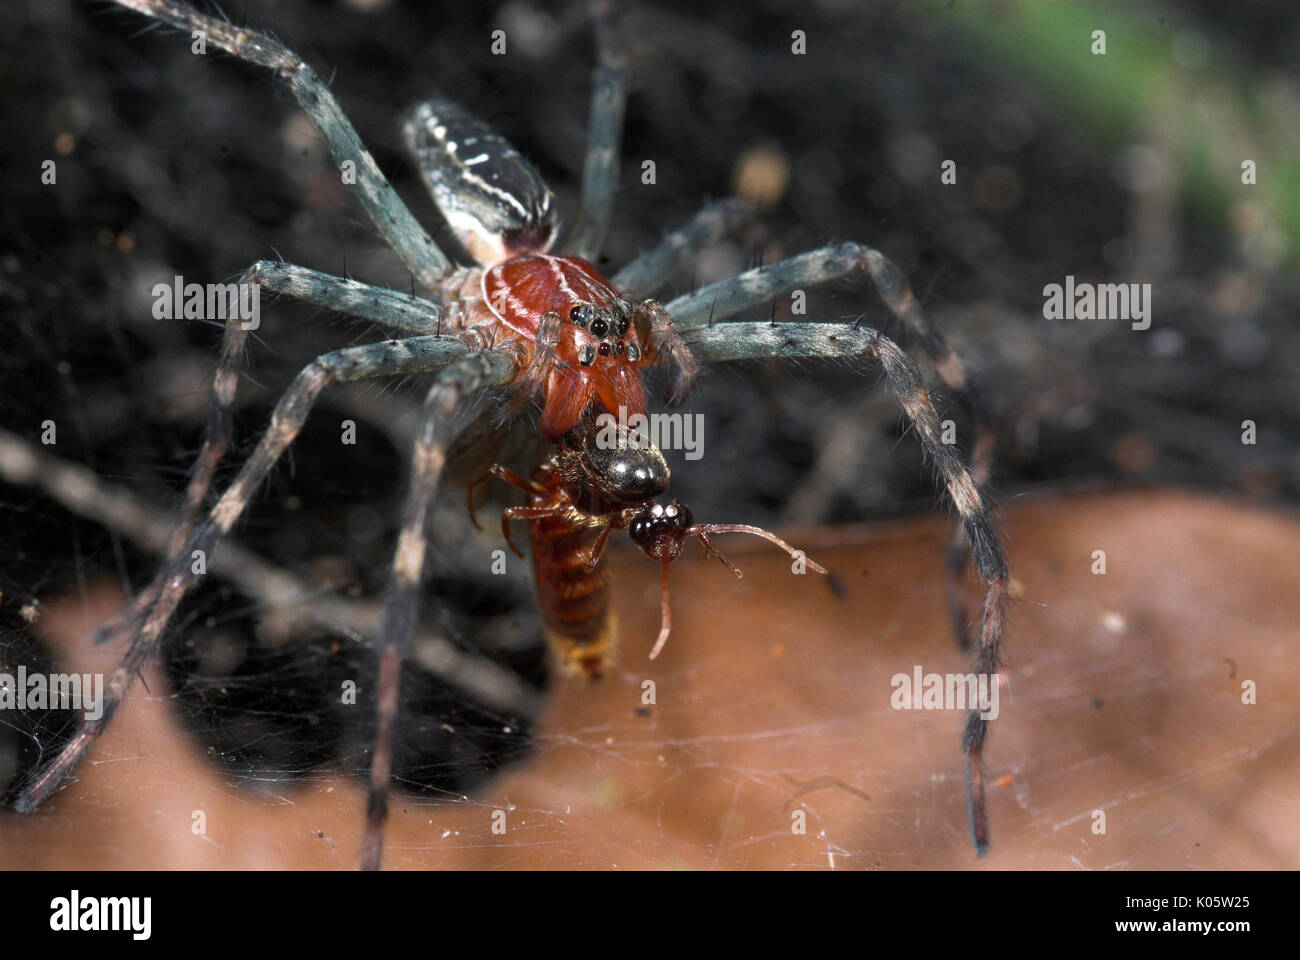 Funnel weavers or grass spiders, Family Agelenidae, Manu Peru, on web with insect prey, feeding, jungle, amazon, red carpace, blue black abdomen and l Stock Photo